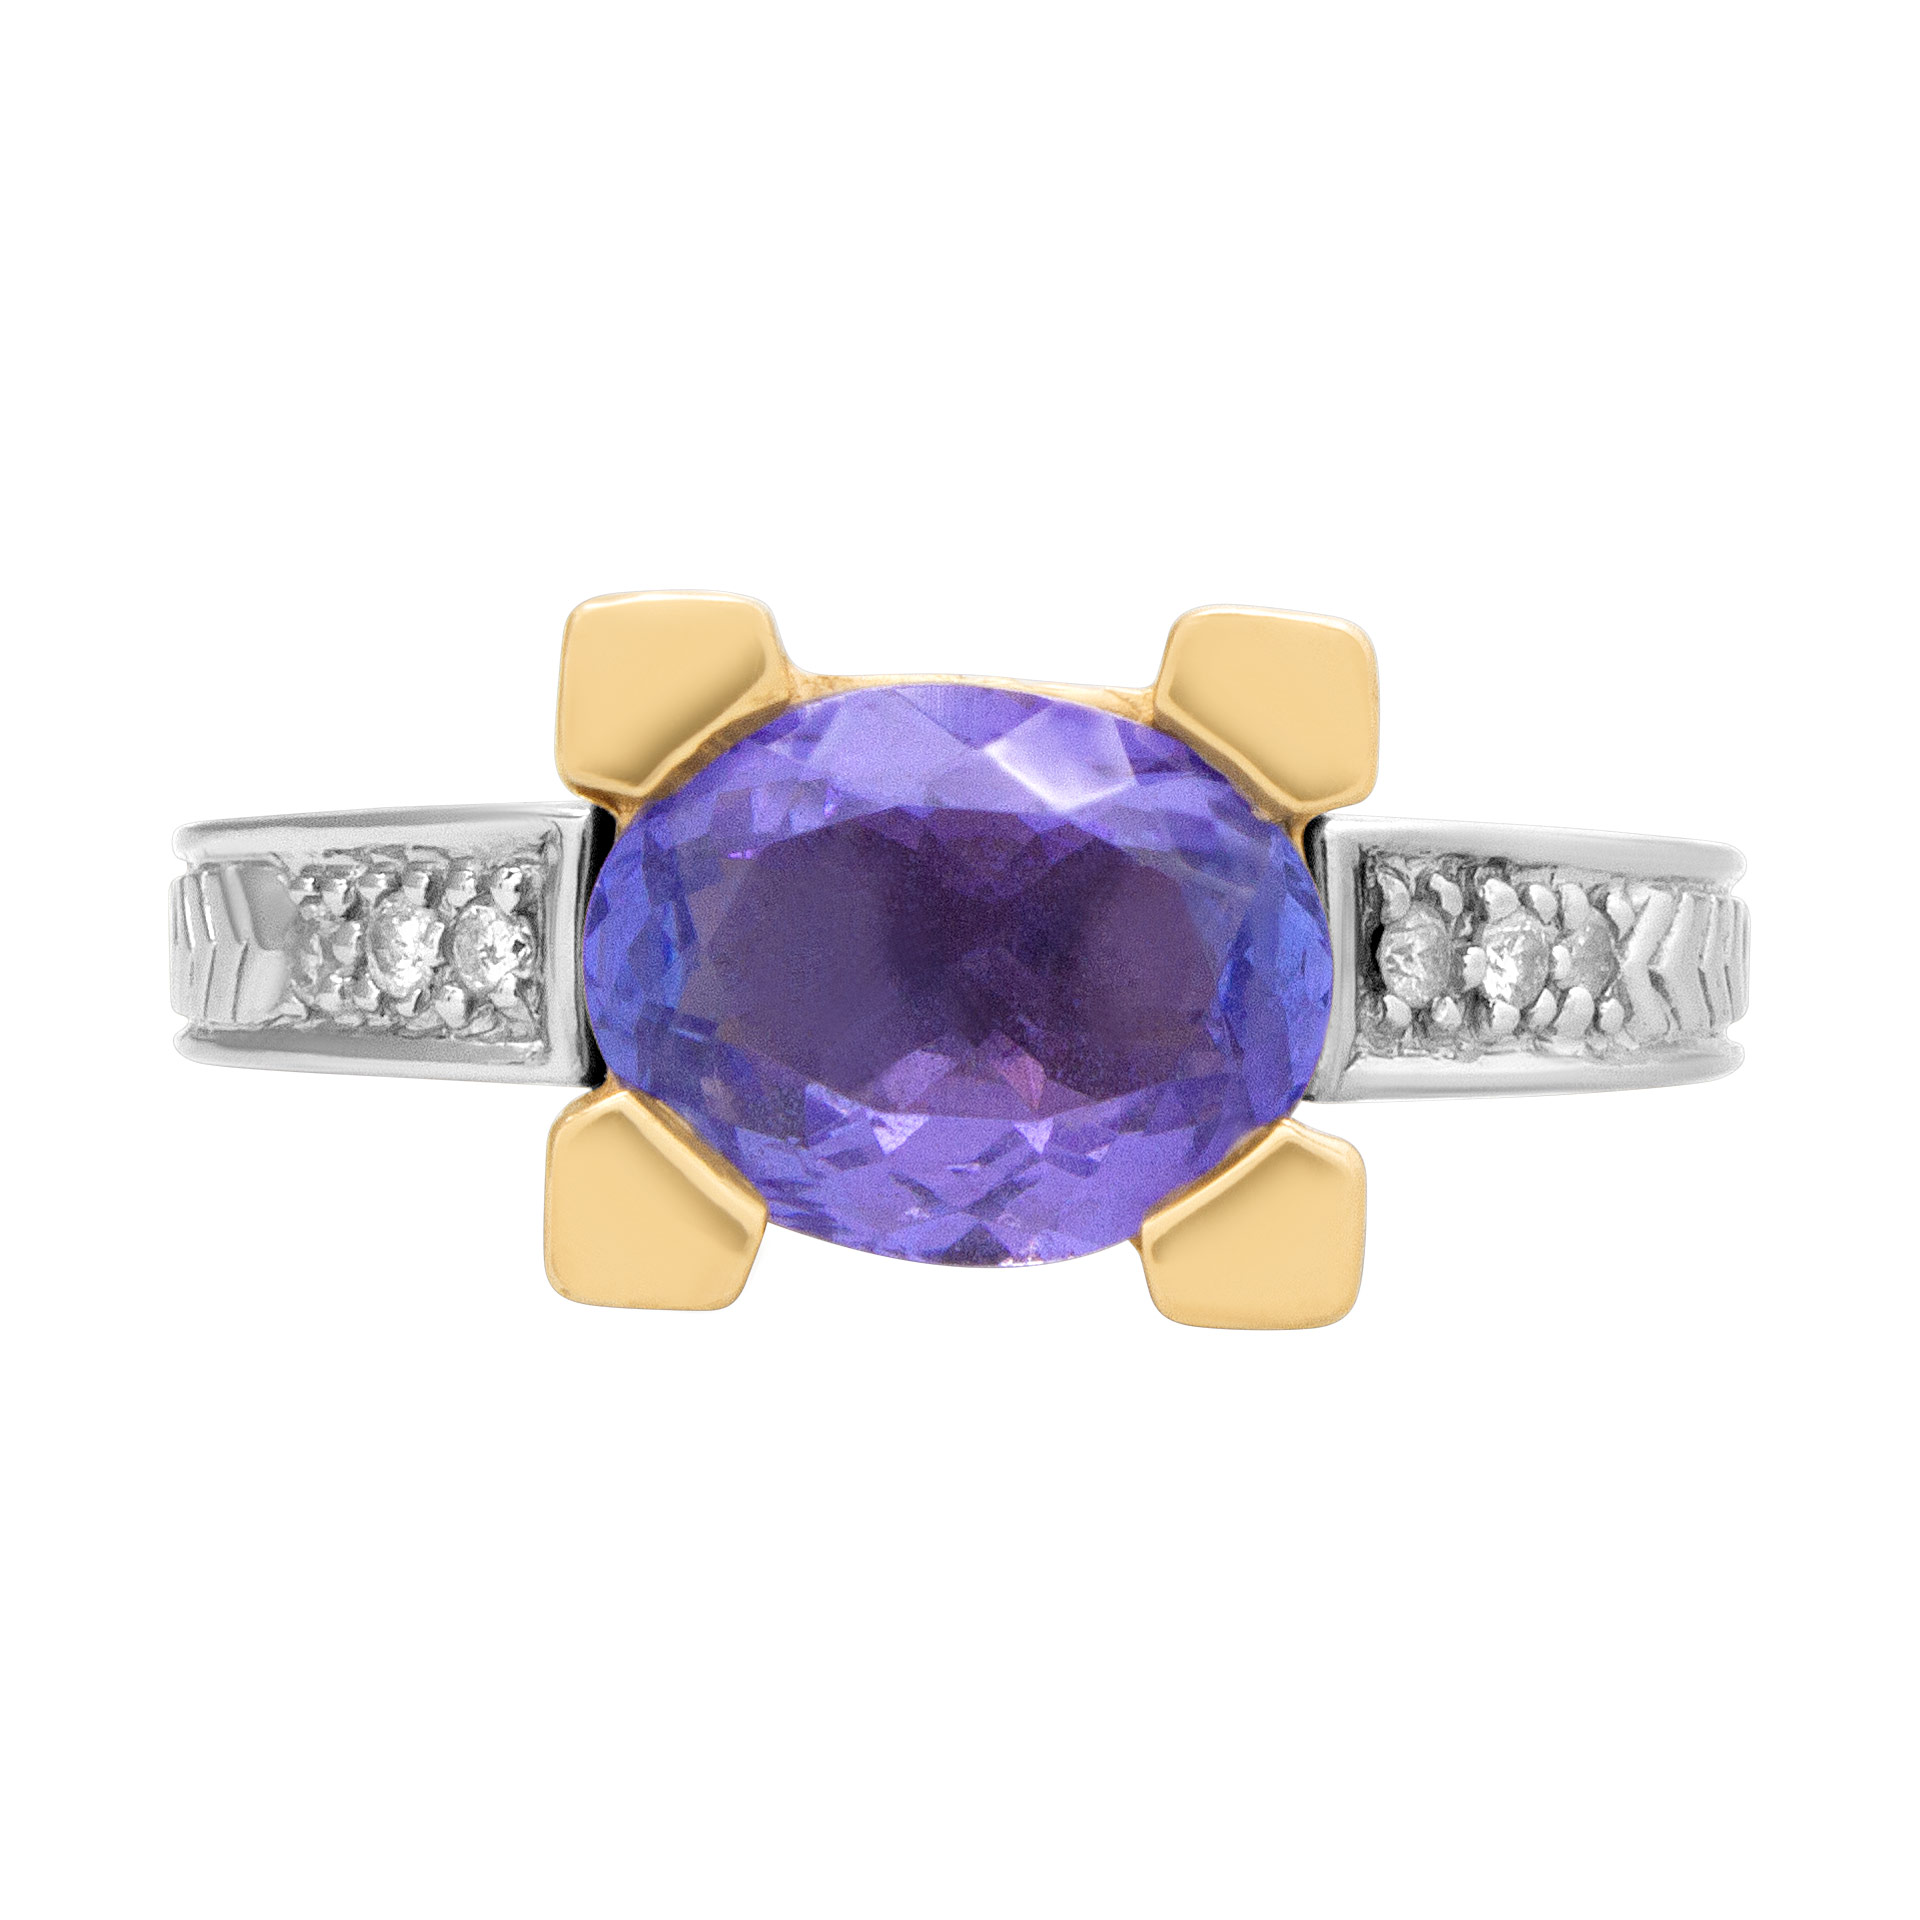 Tanzanite ring (1.50 cts) with diamond accents in 14k white and yellow gold image 1